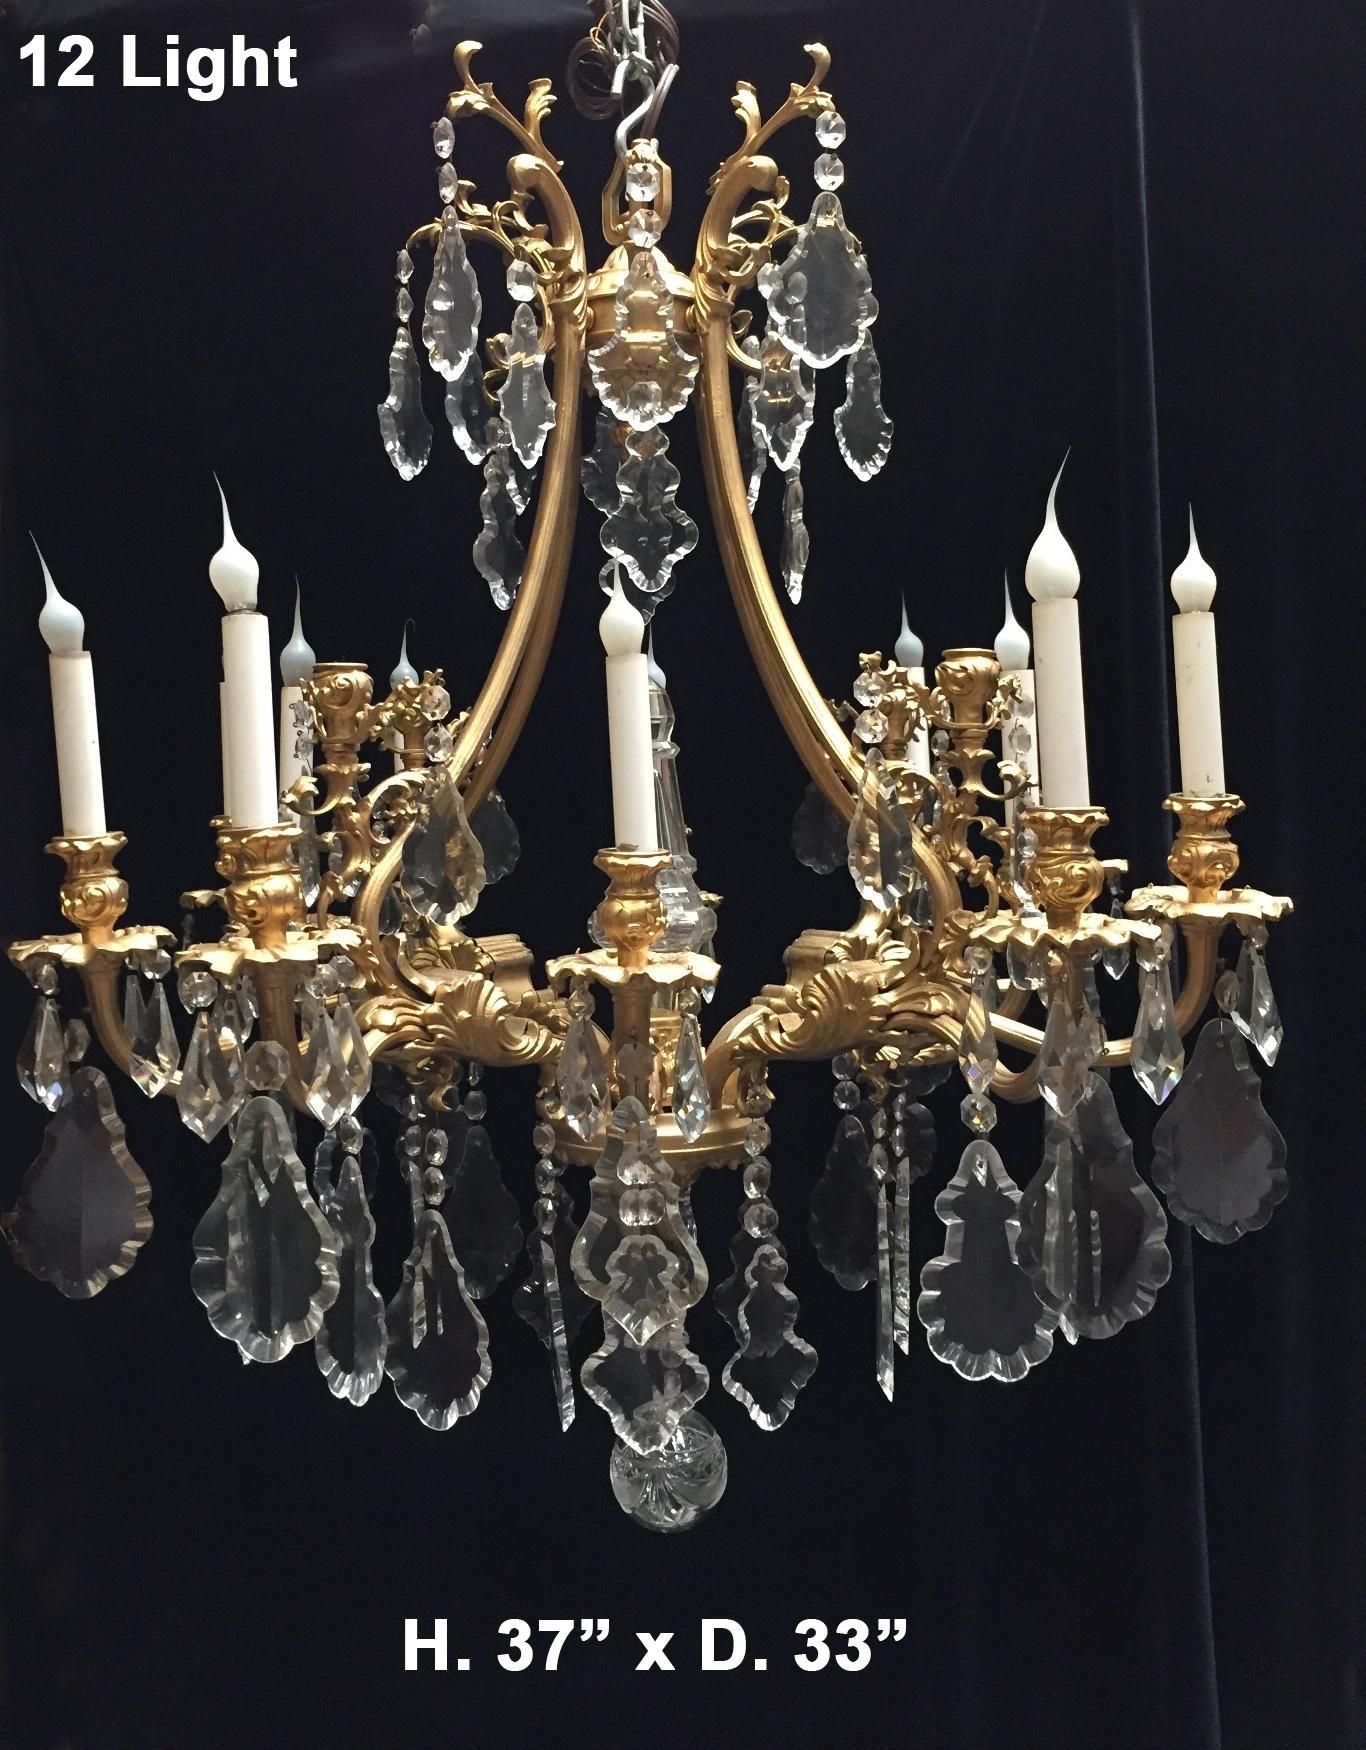 Attractive gilt bronze and finely cut crystal twelve-light chandelier, first half of 20th Century.
The chandelier is well-proportioned, featuring intricate and beautiful details. The twelve candelabra branches are elegant with natural flow,